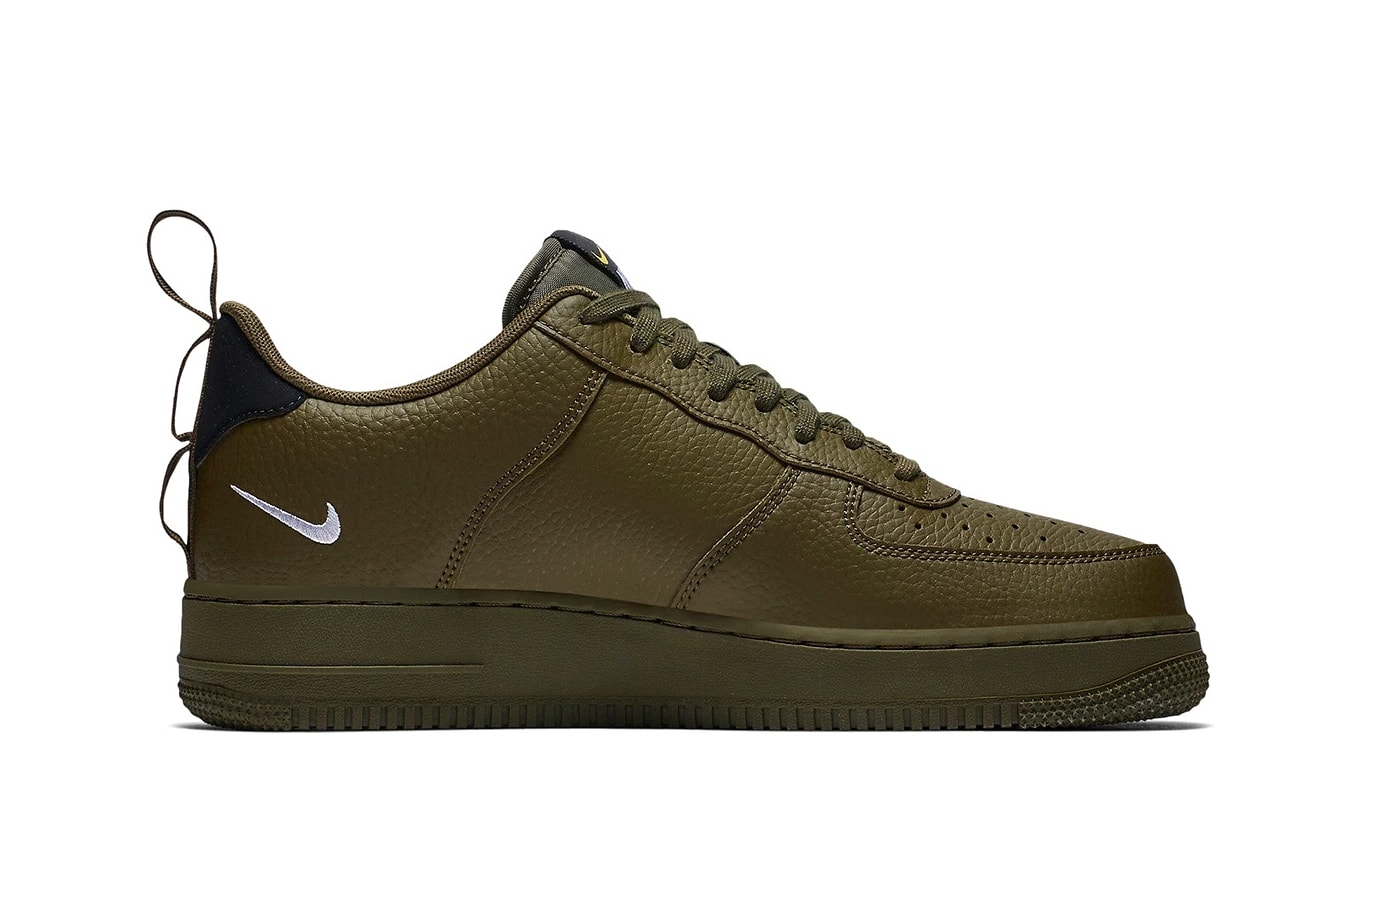 The Nike Air Force 1 '07 LV8 Utility Low Pack drops this week